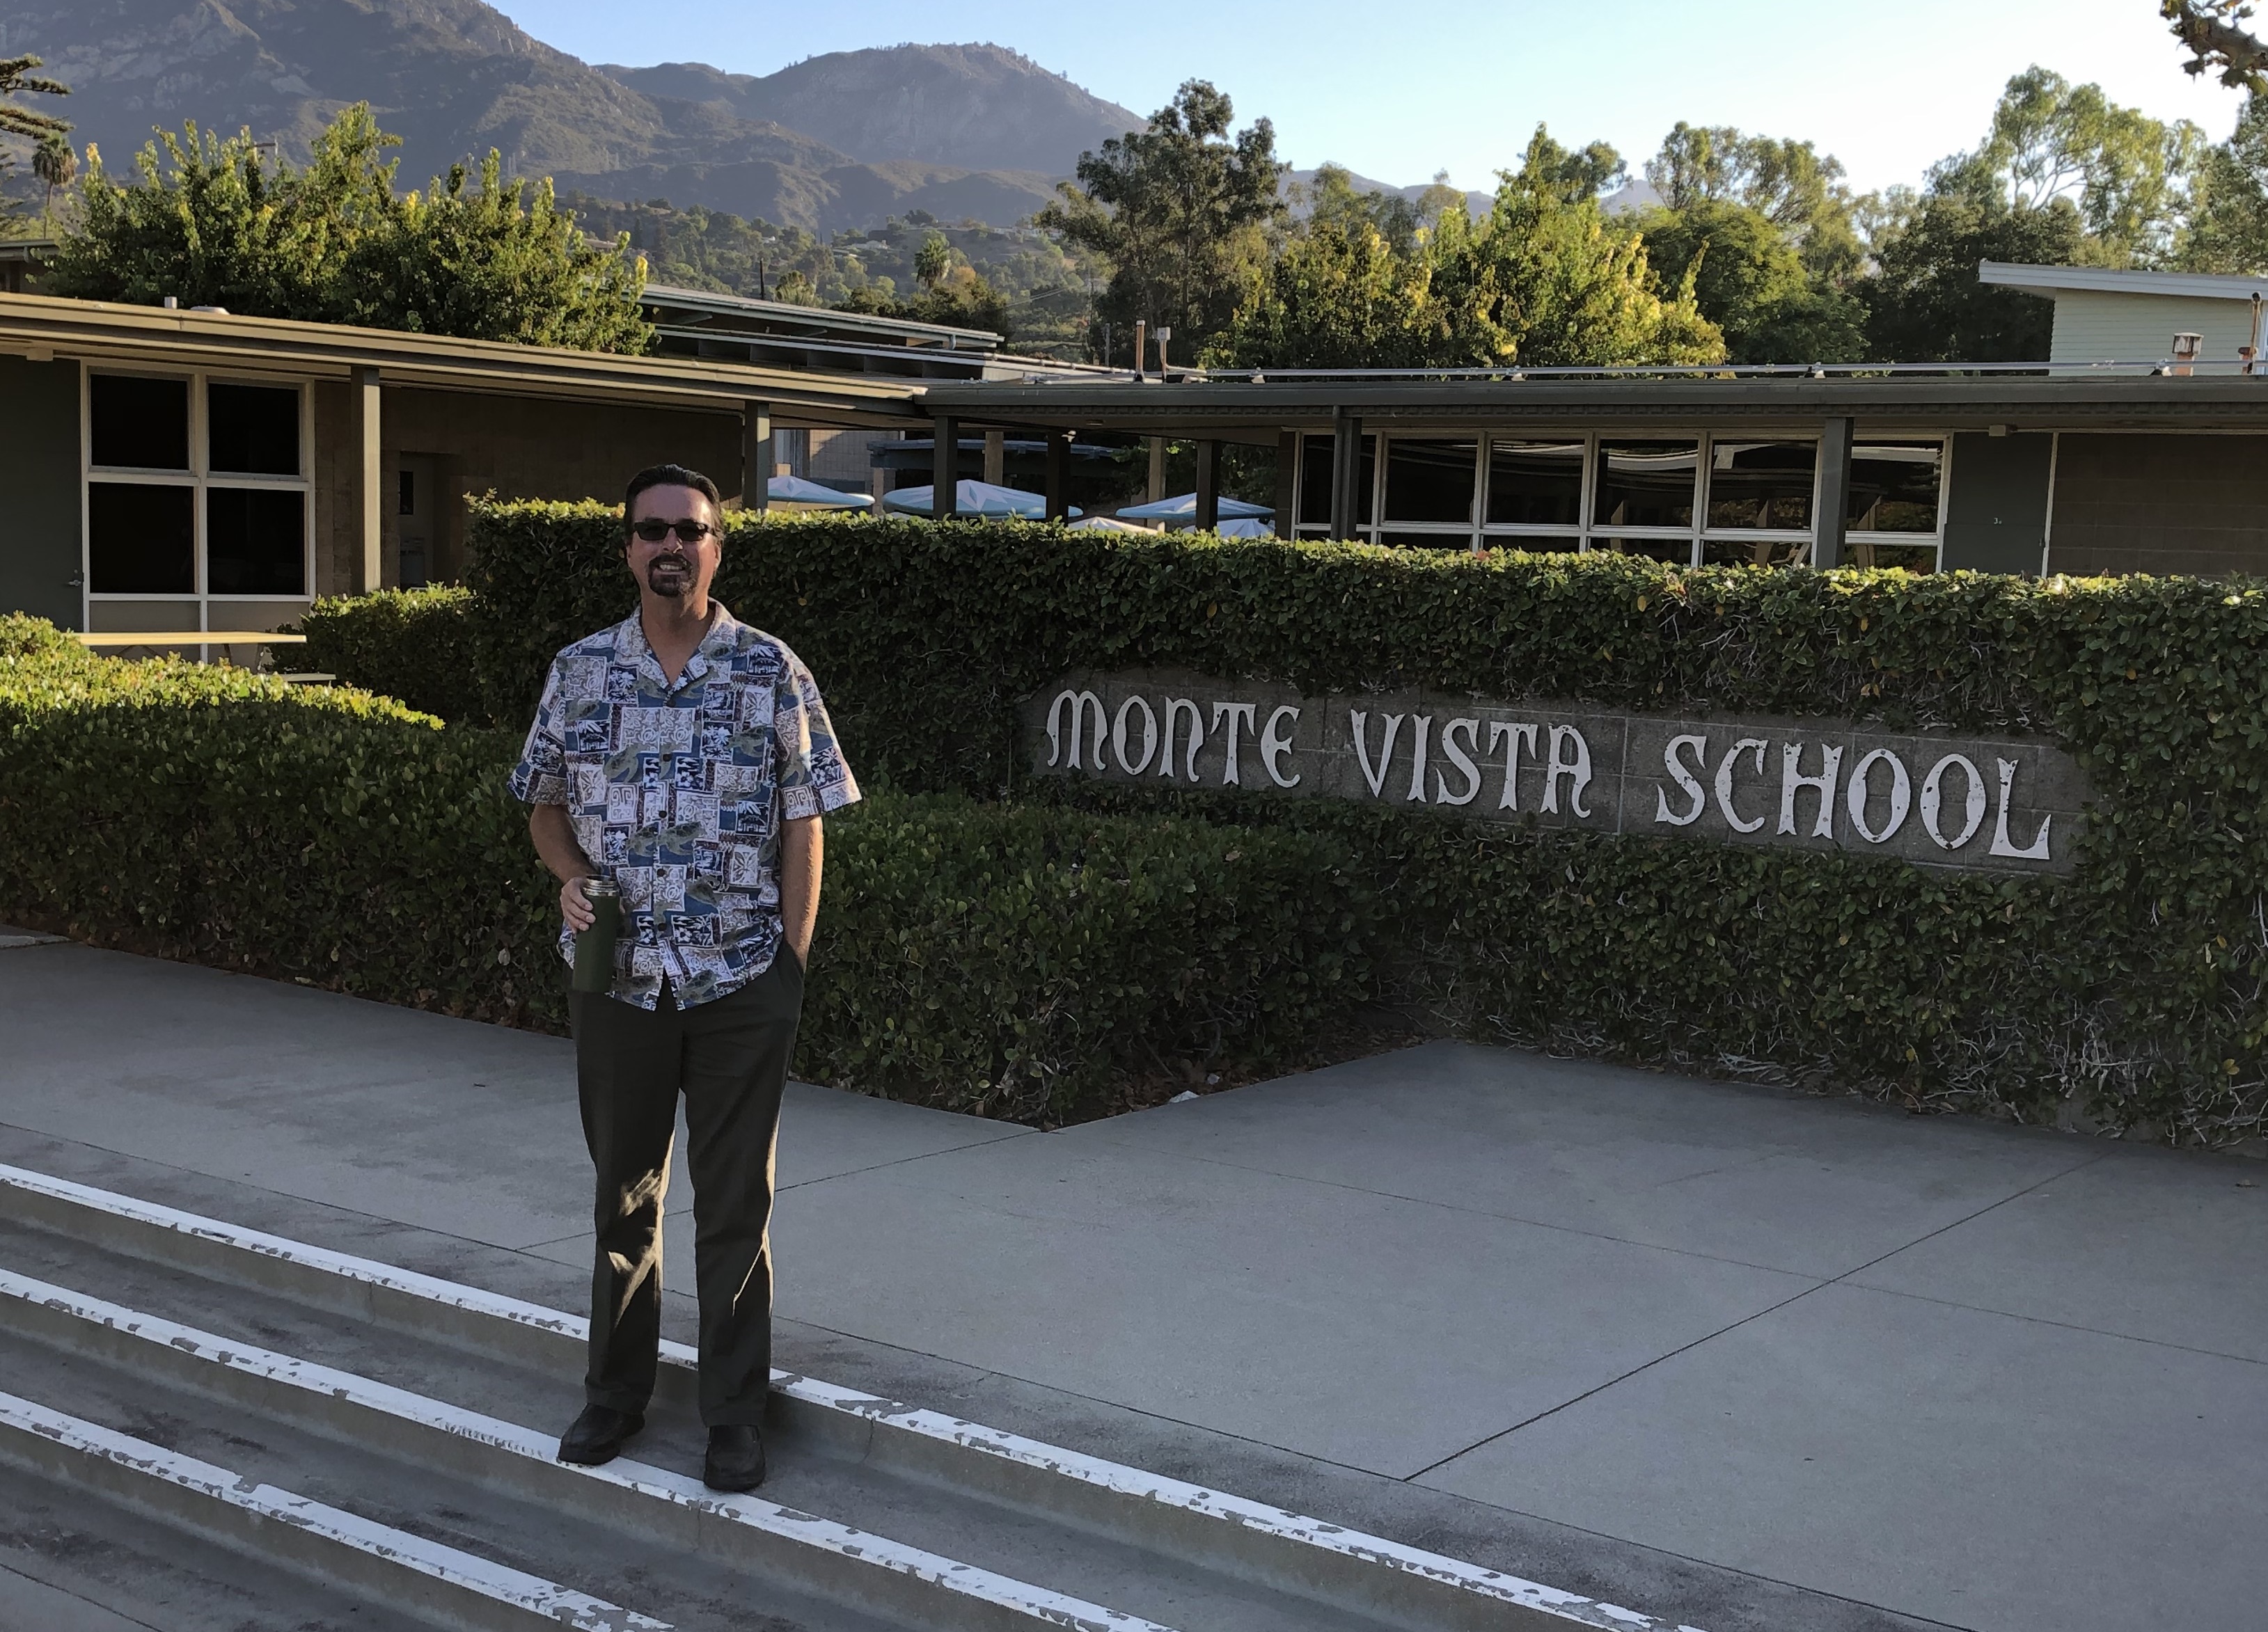 Teen Fuck In School - Havoc at Hope School District over 'Child Porn' - The Santa Barbara  Independent